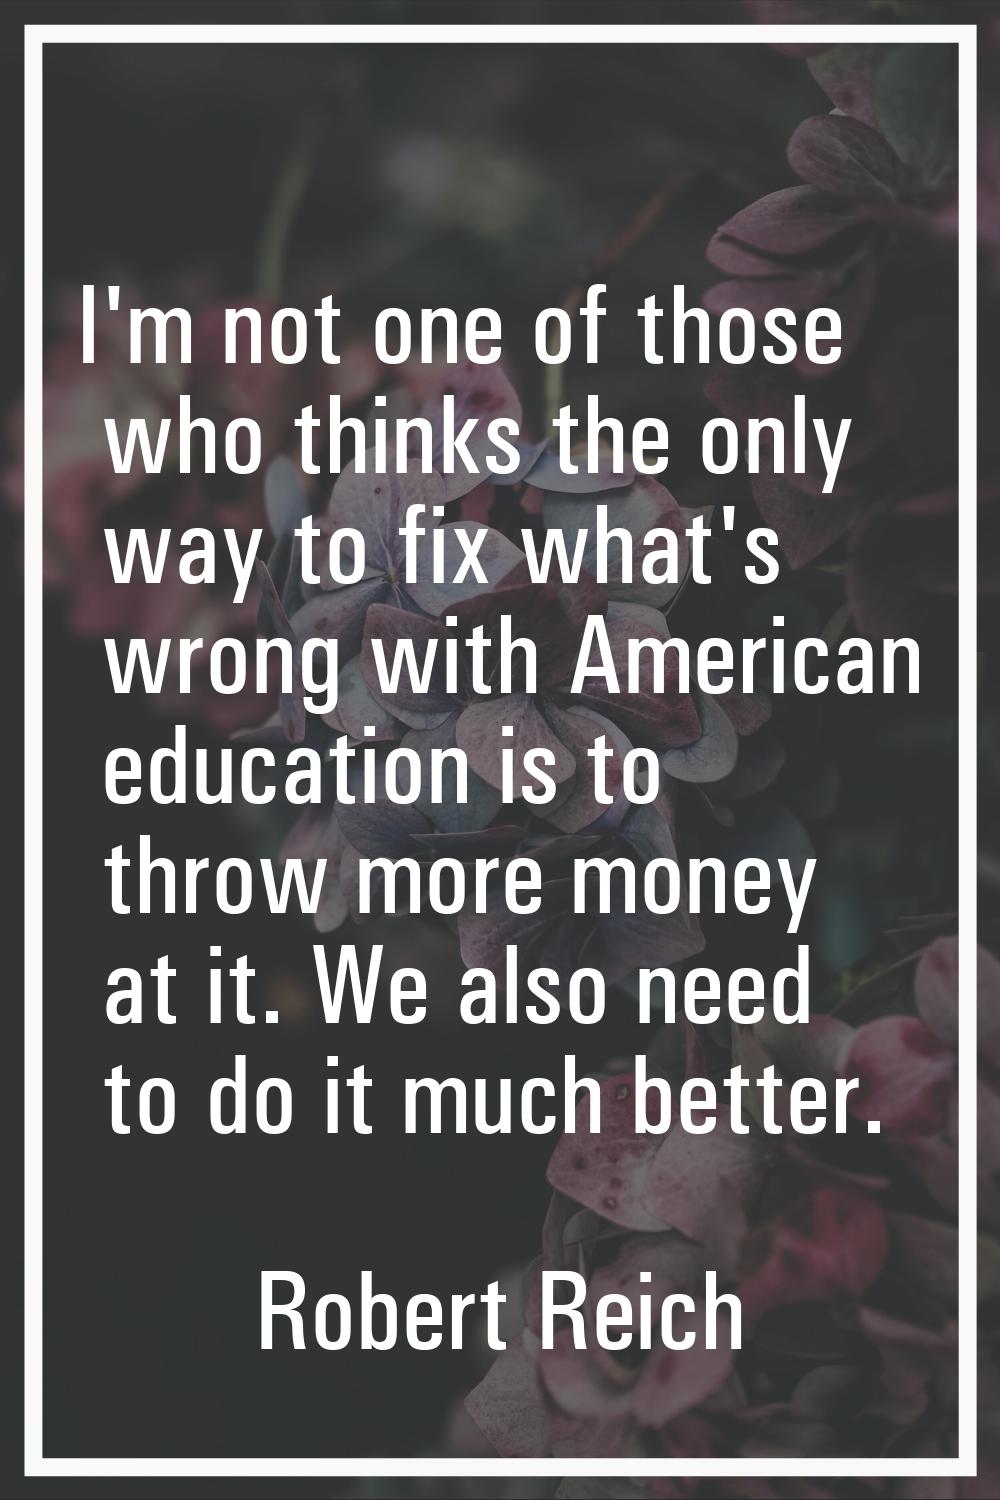 I'm not one of those who thinks the only way to fix what's wrong with American education is to thro